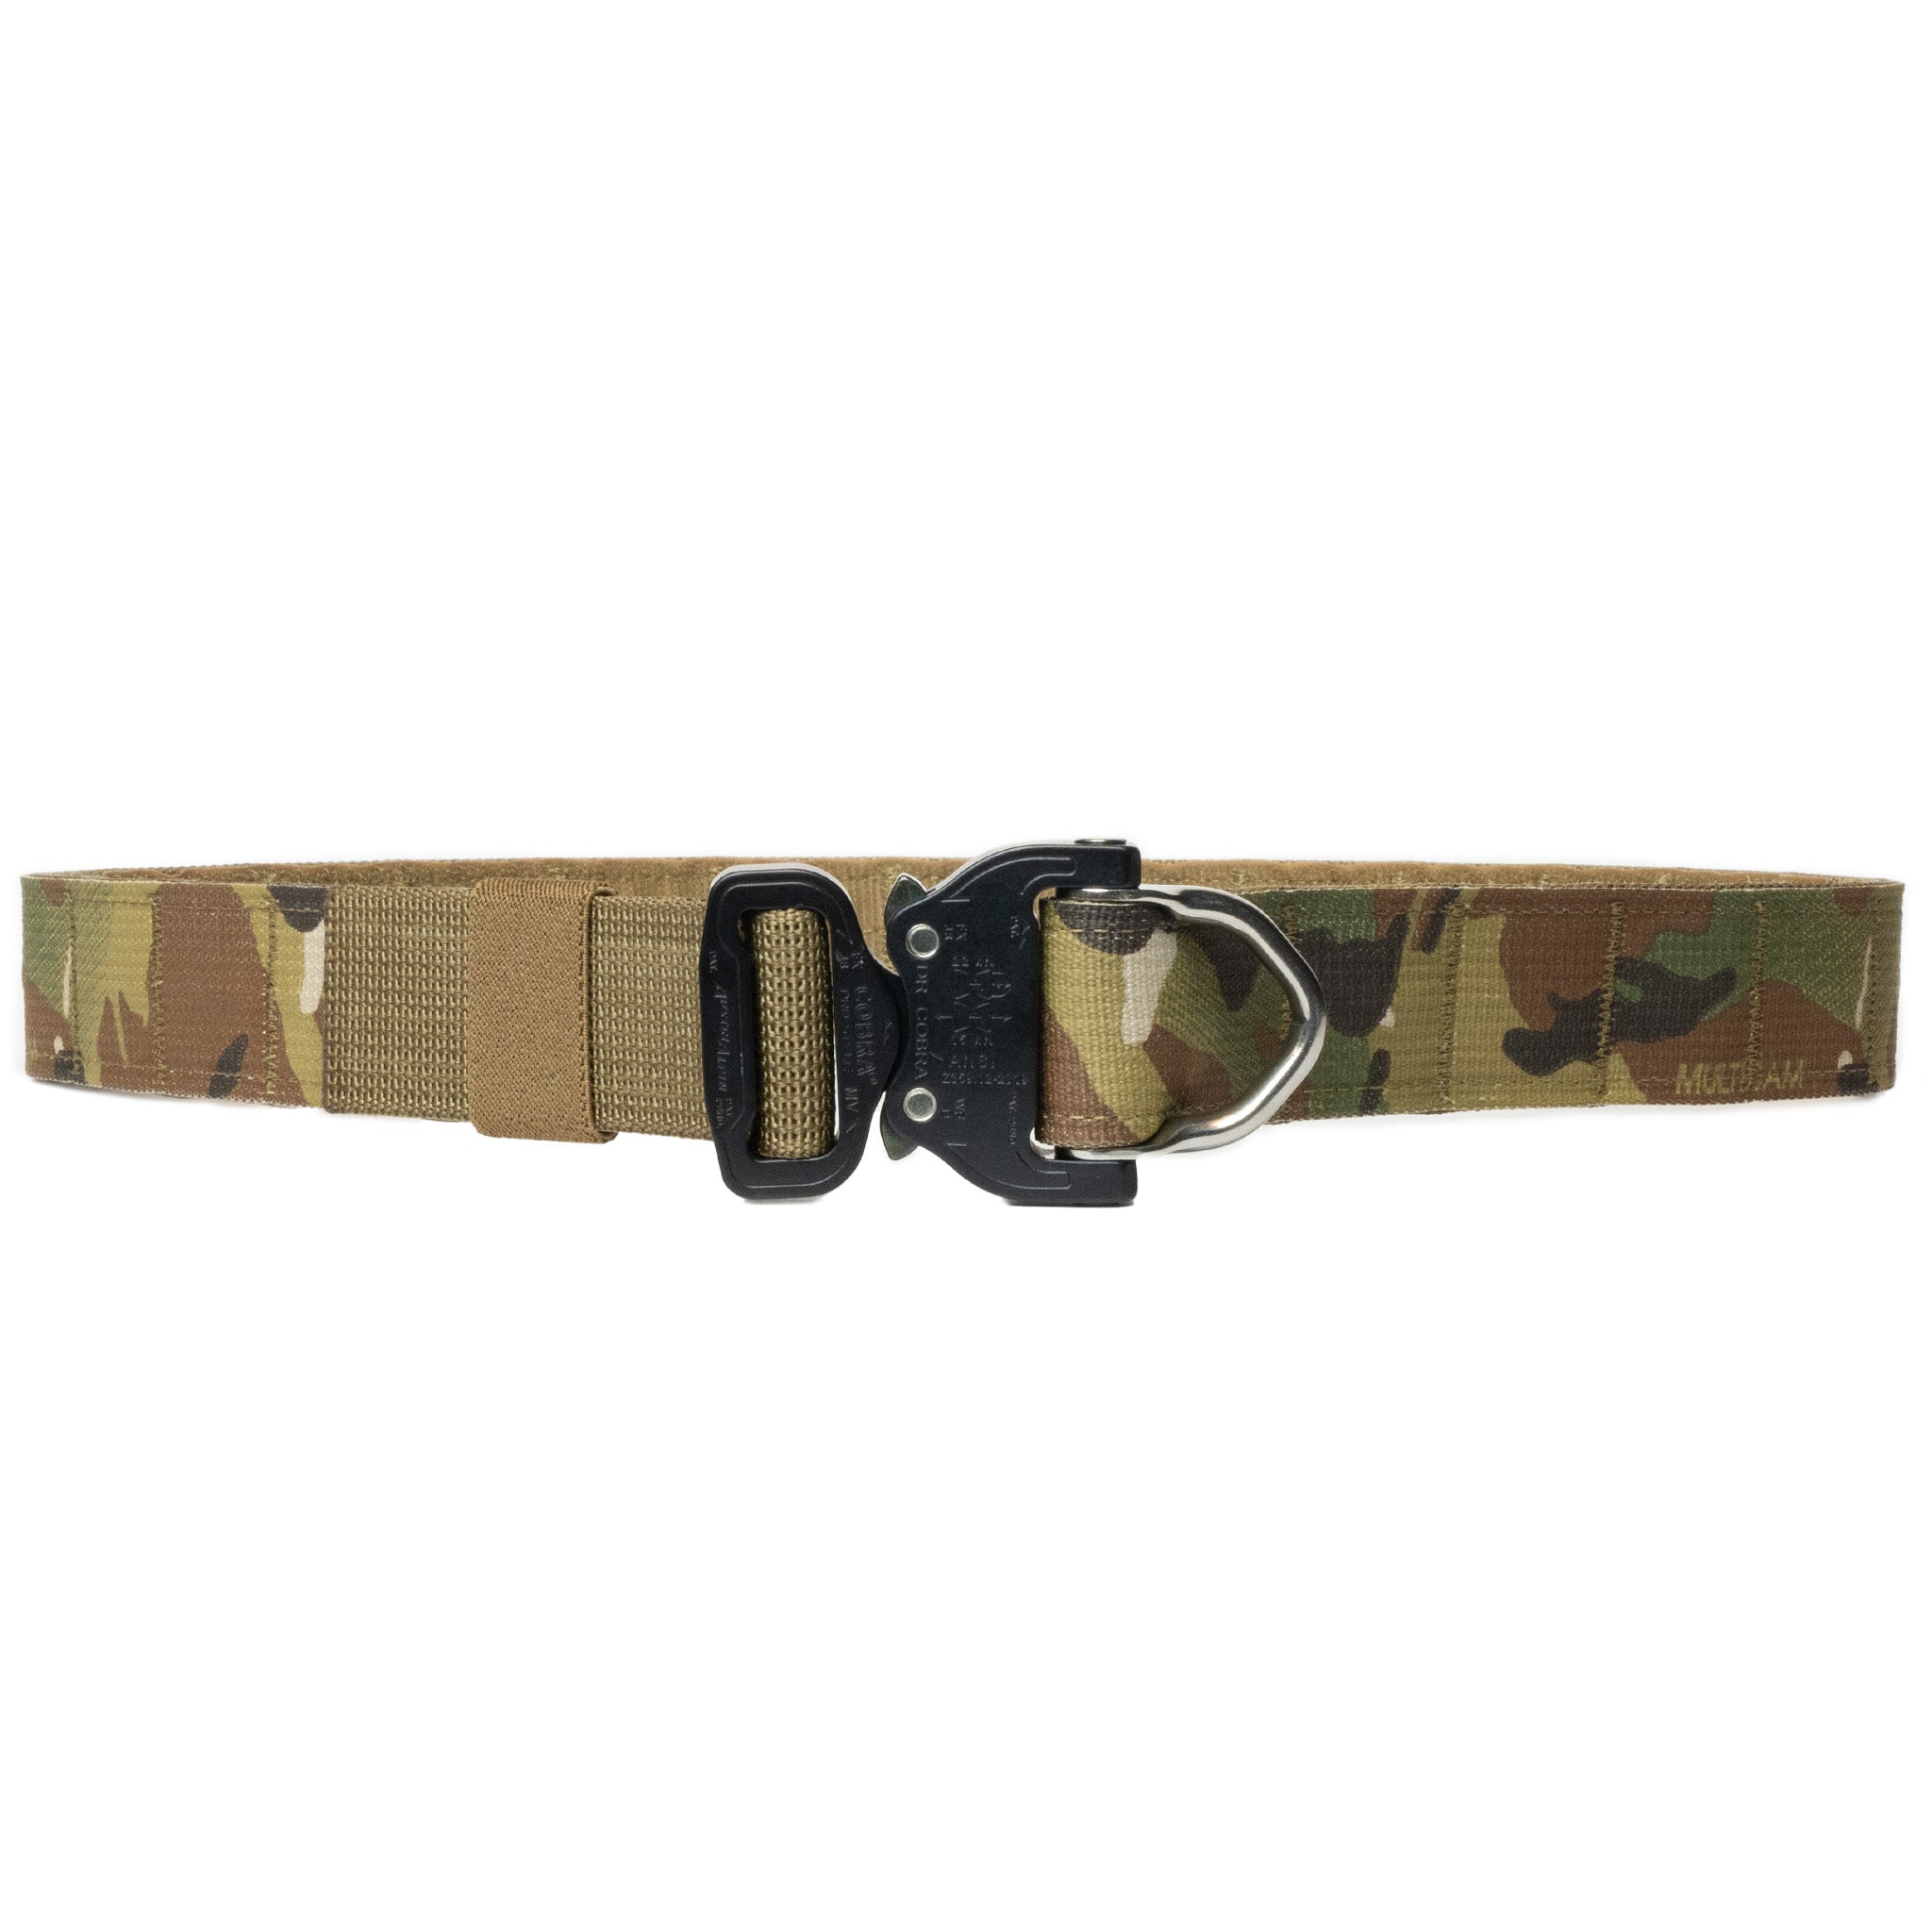 Ciguera Gear Company Battlewagon War Belt in Multicam that is the ideal choice as a duty belt. It's made in the USA and uses licensed Multicam webbing from Crye Precision. The buckle is a Austri Alpin Cobra Buckle.